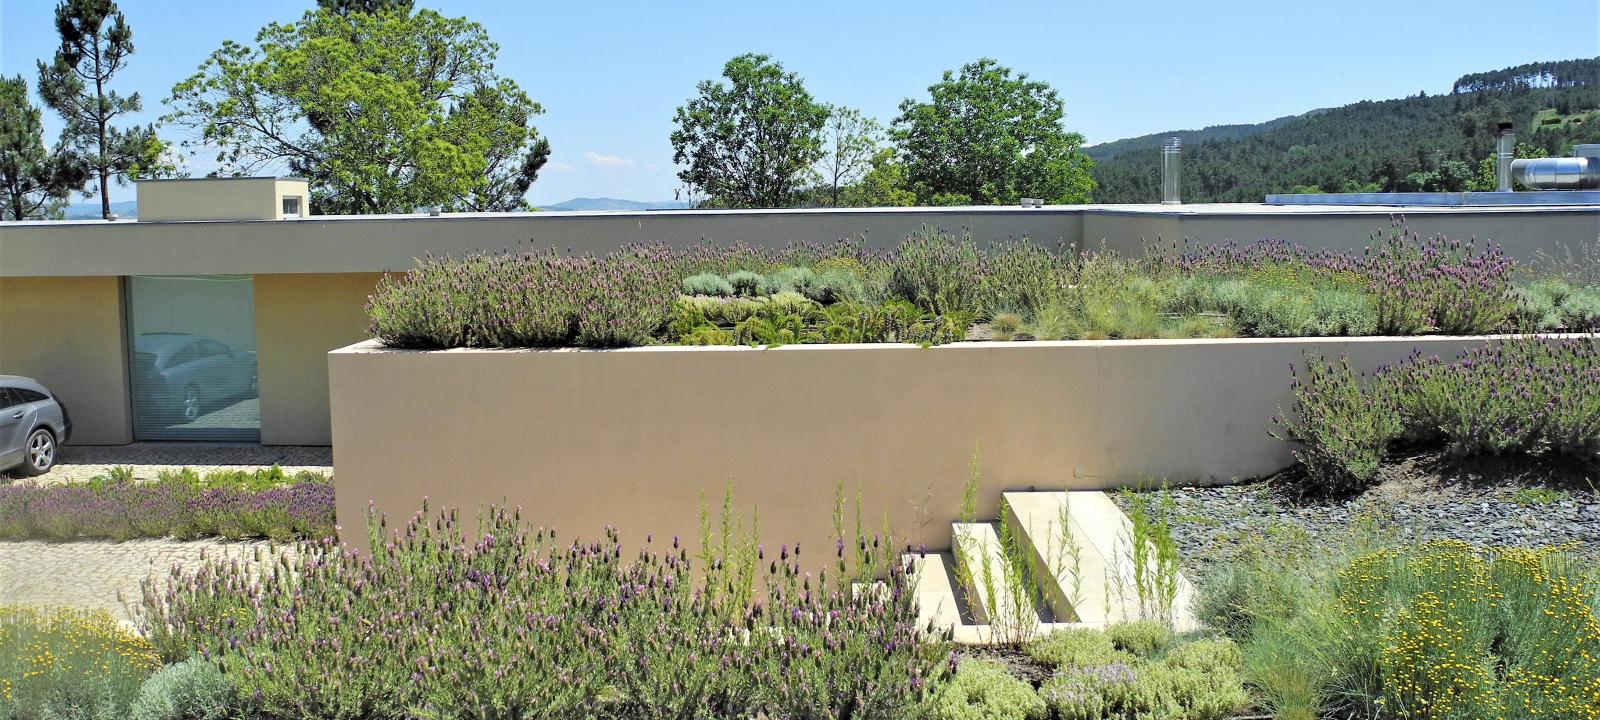 Flat roofs vegetated with lavender and herbs